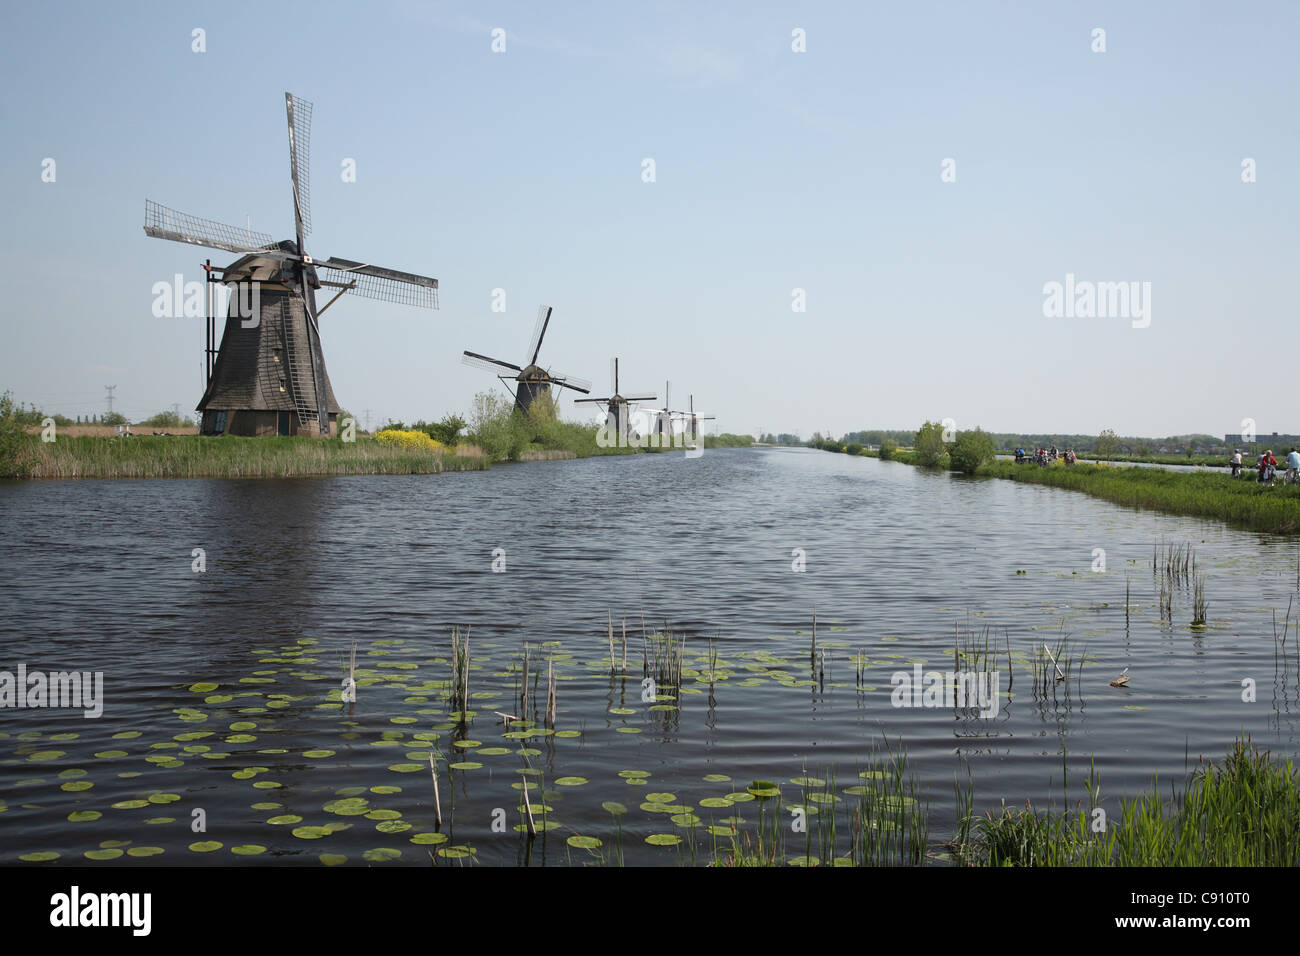 The windmills of Kinderdijk were built to pump water around the system of canals or polders. They are one of the best known Stock Photo